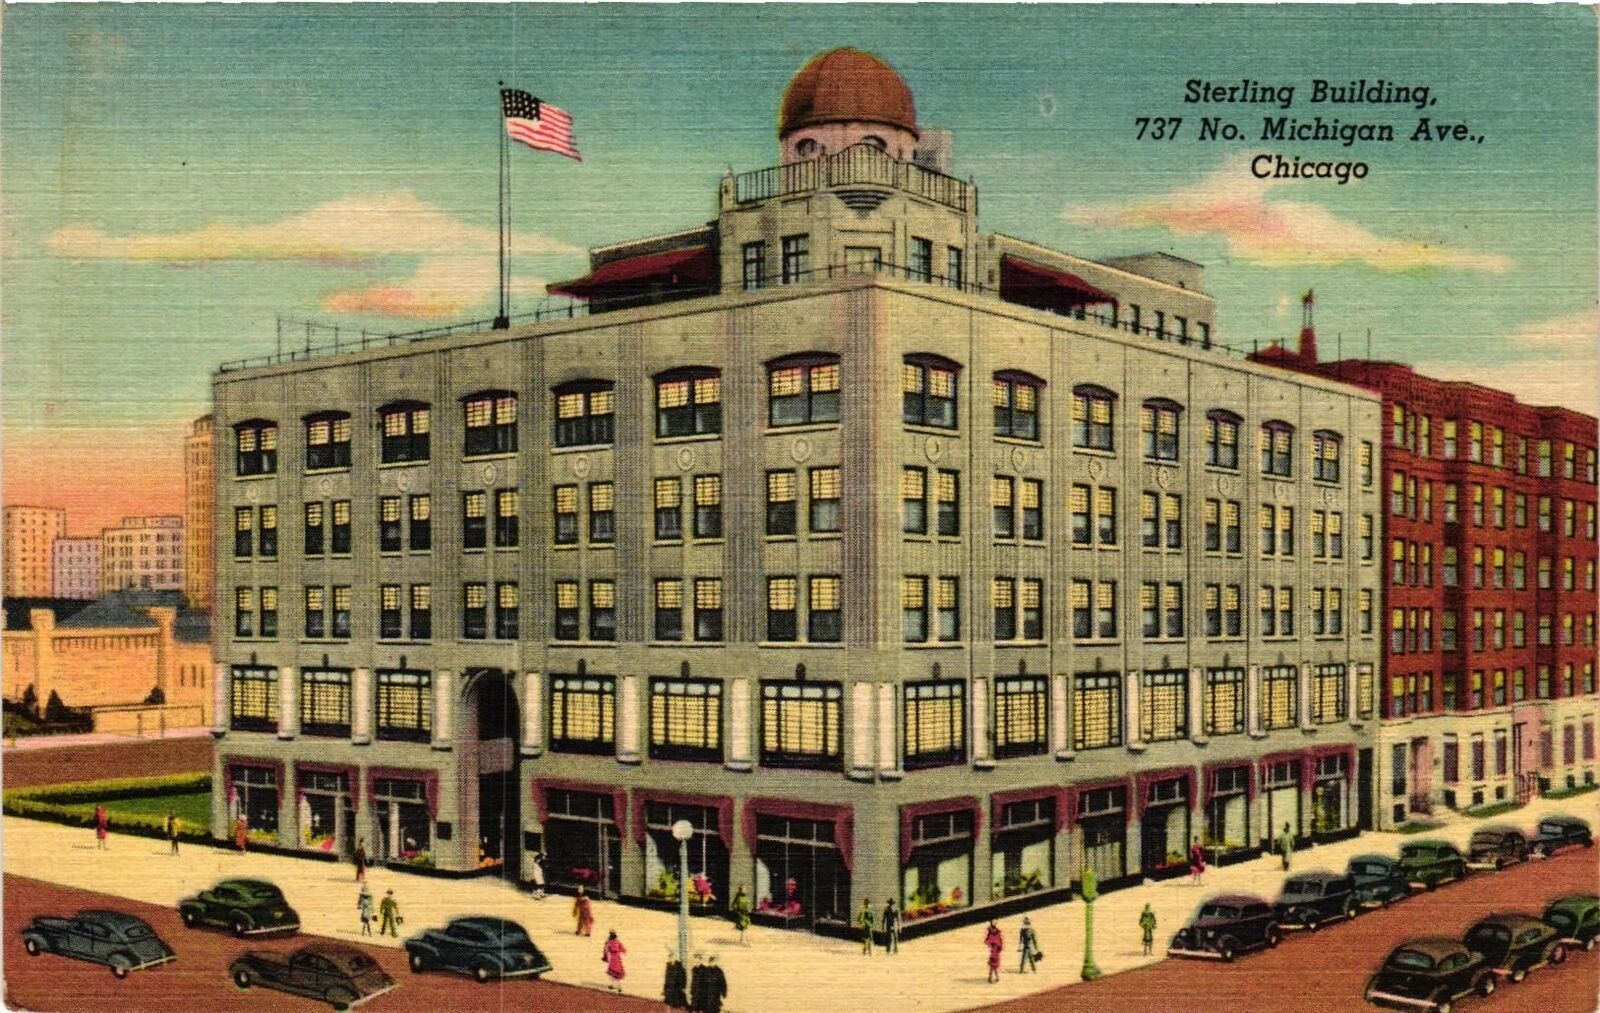 Vintage Postcard- Sterling Building, Chicago, IL Early 1900s